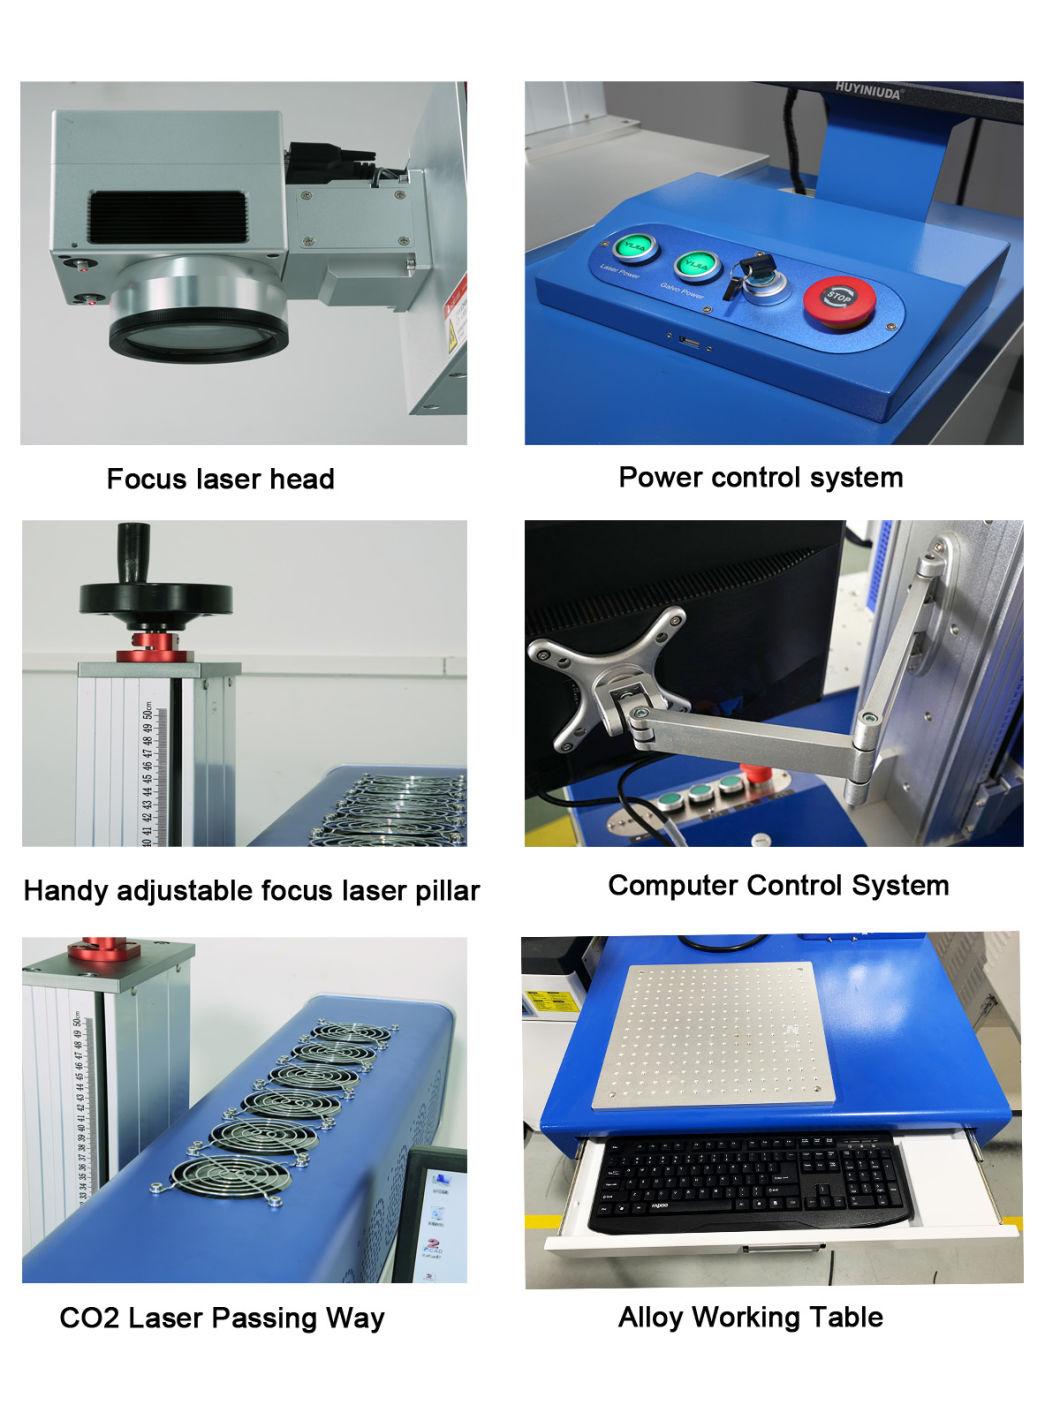 Dongguan Water Cooding CO2 Laser Engraving Equipment with Multiple Control Tools